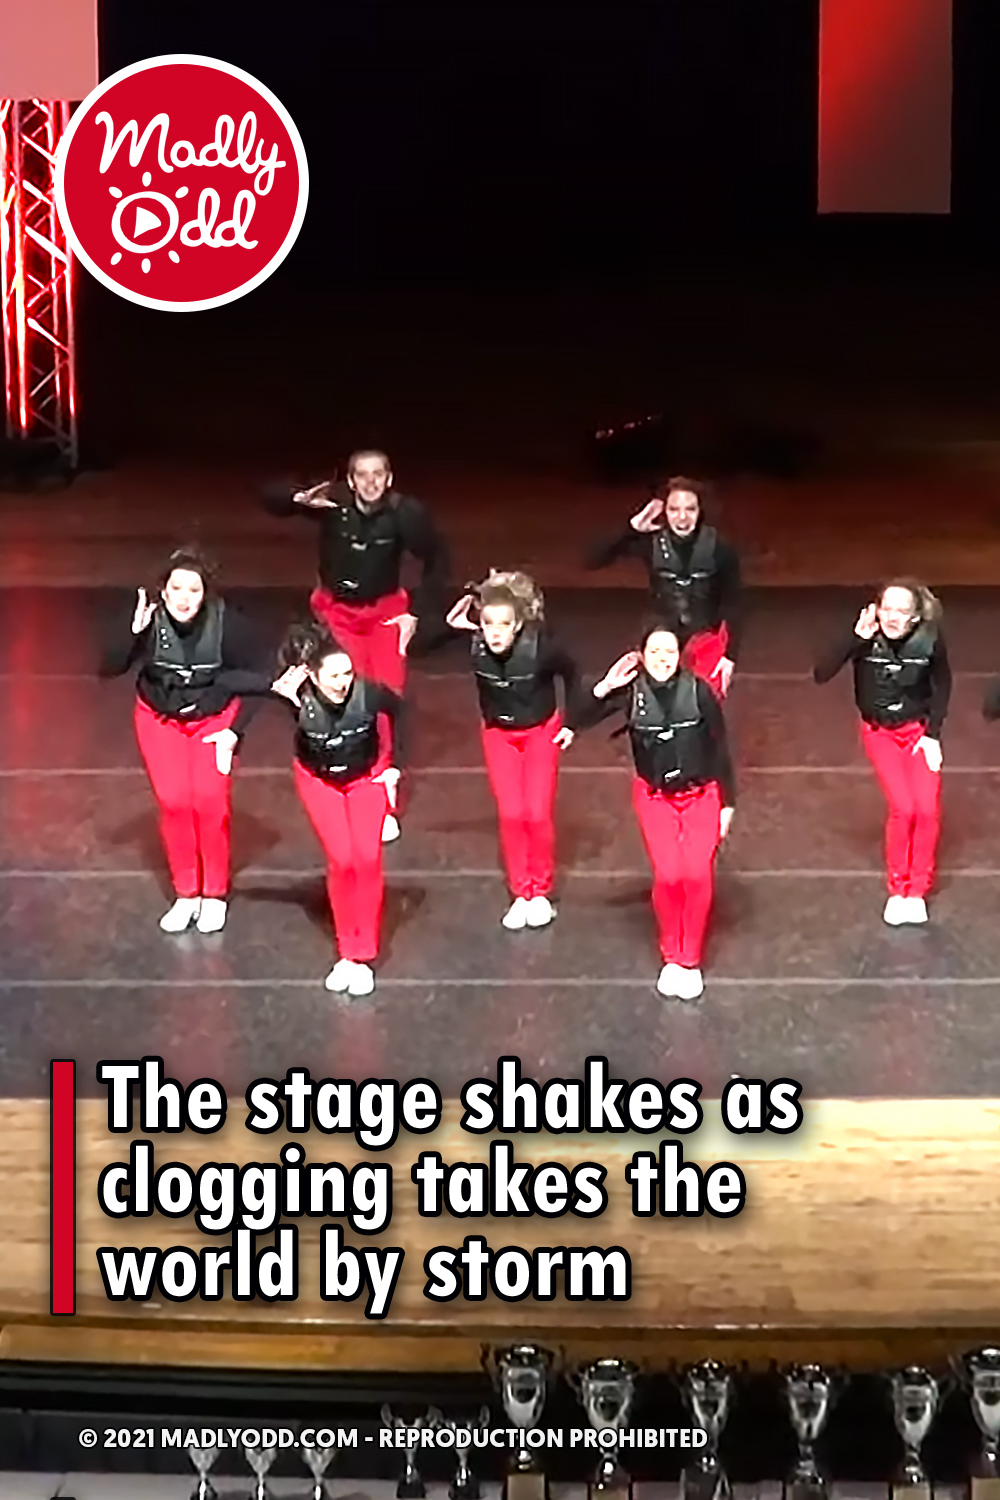 The stage shakes as clogging takes the world by storm